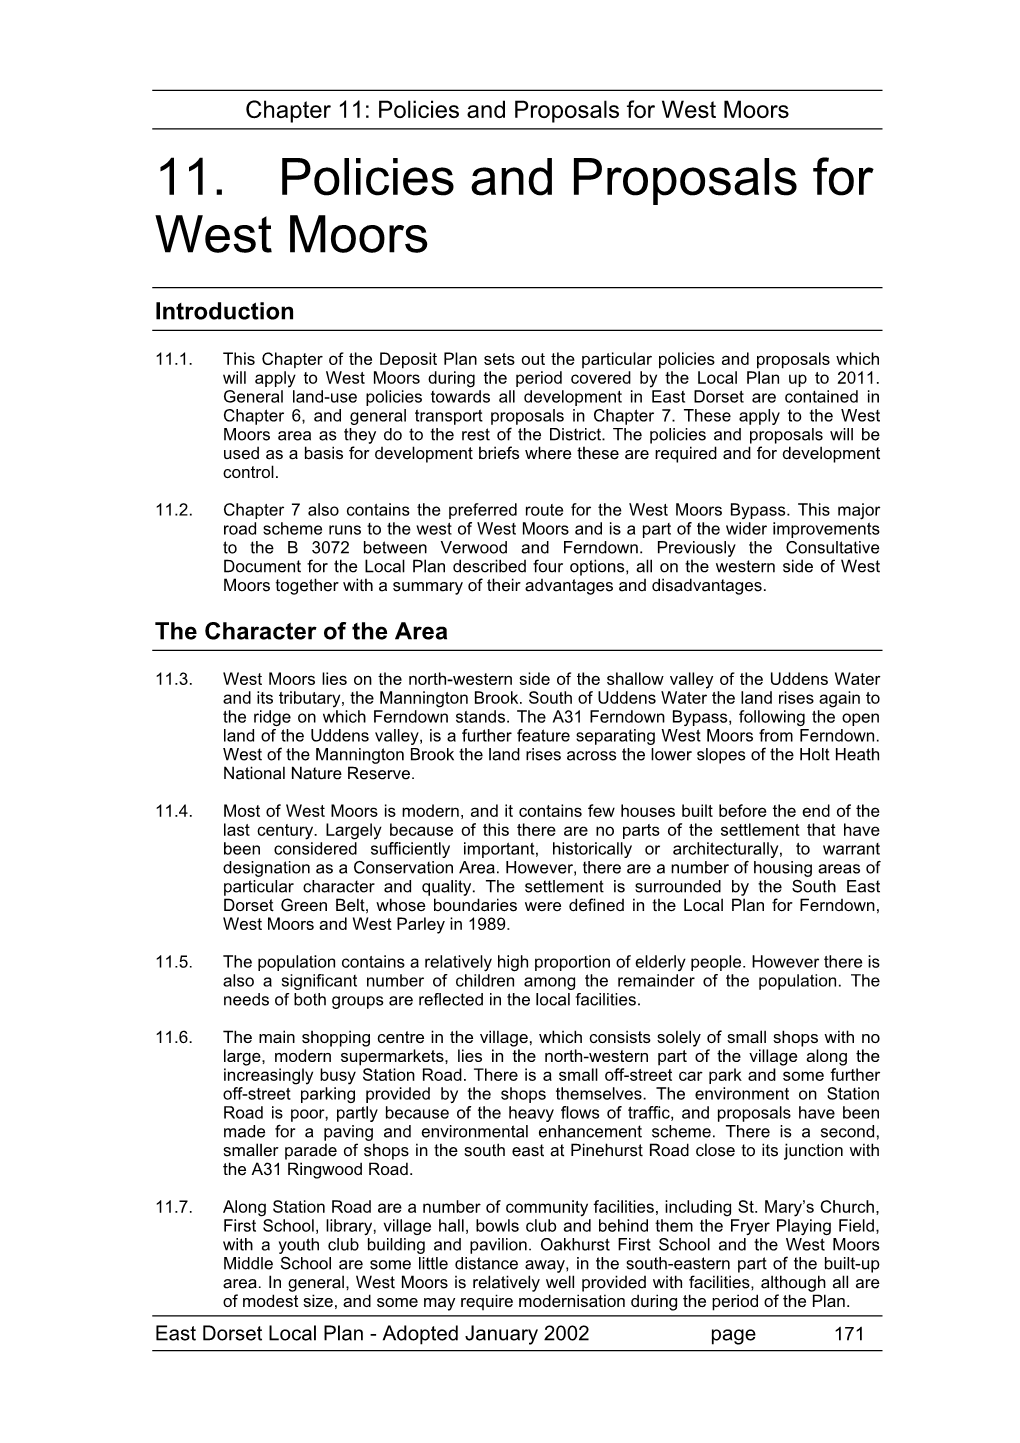 Chapter-11 West Moors